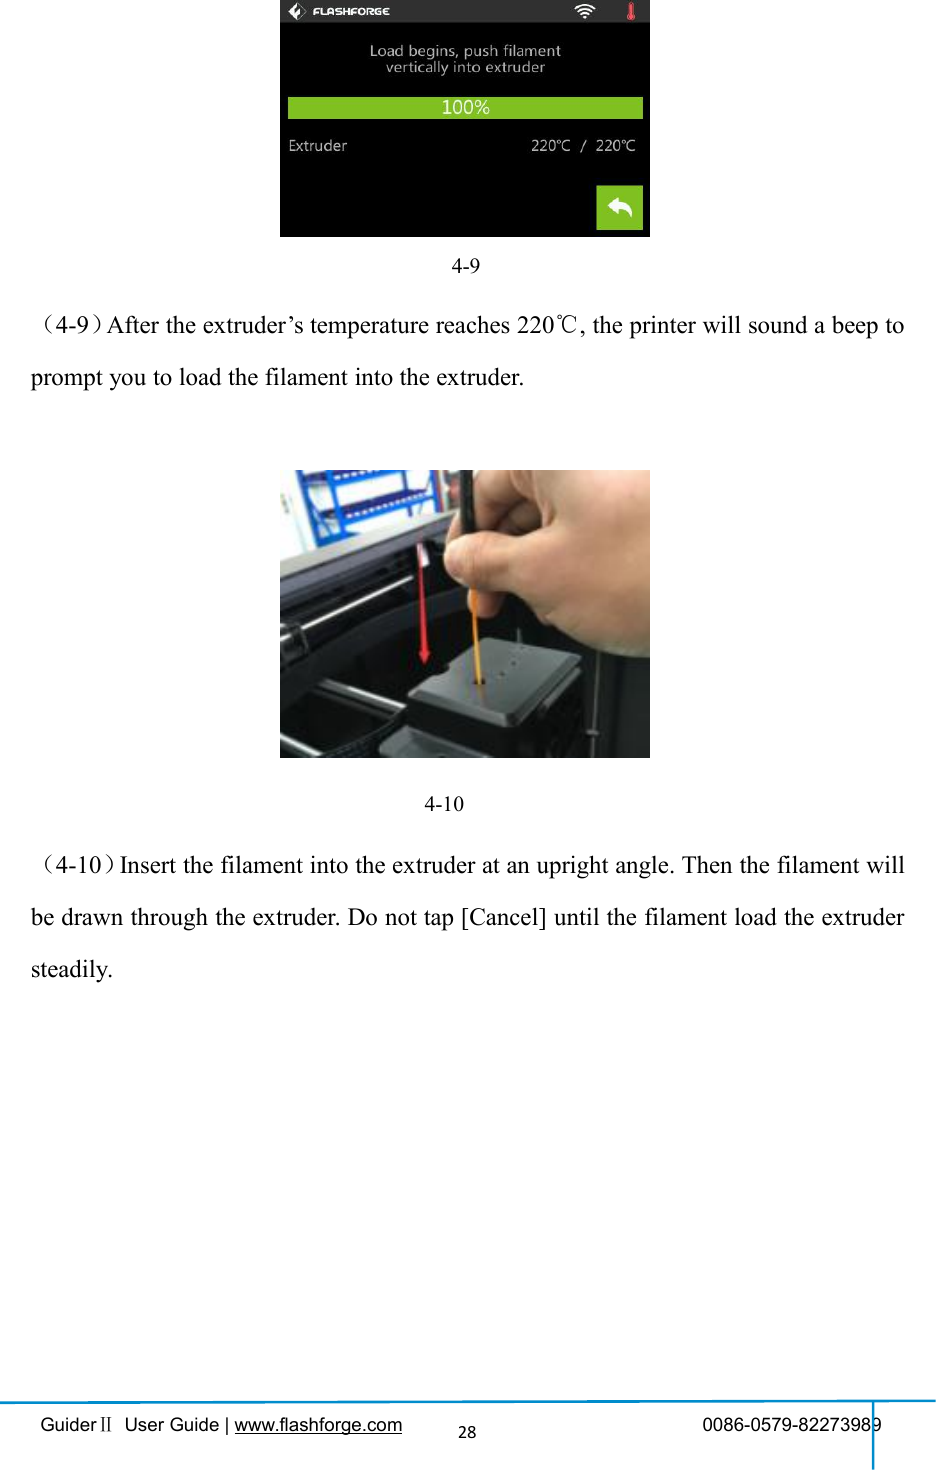 GuiderⅡUser Guide | www.flashforge.com 0086-0579-82273989284-9（4-9）After the extruder’s temperature reaches 220℃, the printer will sound a beep toprompt you to load the filament into the extruder.4-10（4-10）Insert the filament into the extruder at an upright angle. Then the filament willbe drawn through the extruder. Do not tap [Cancel] until the filament load the extrudersteadily.